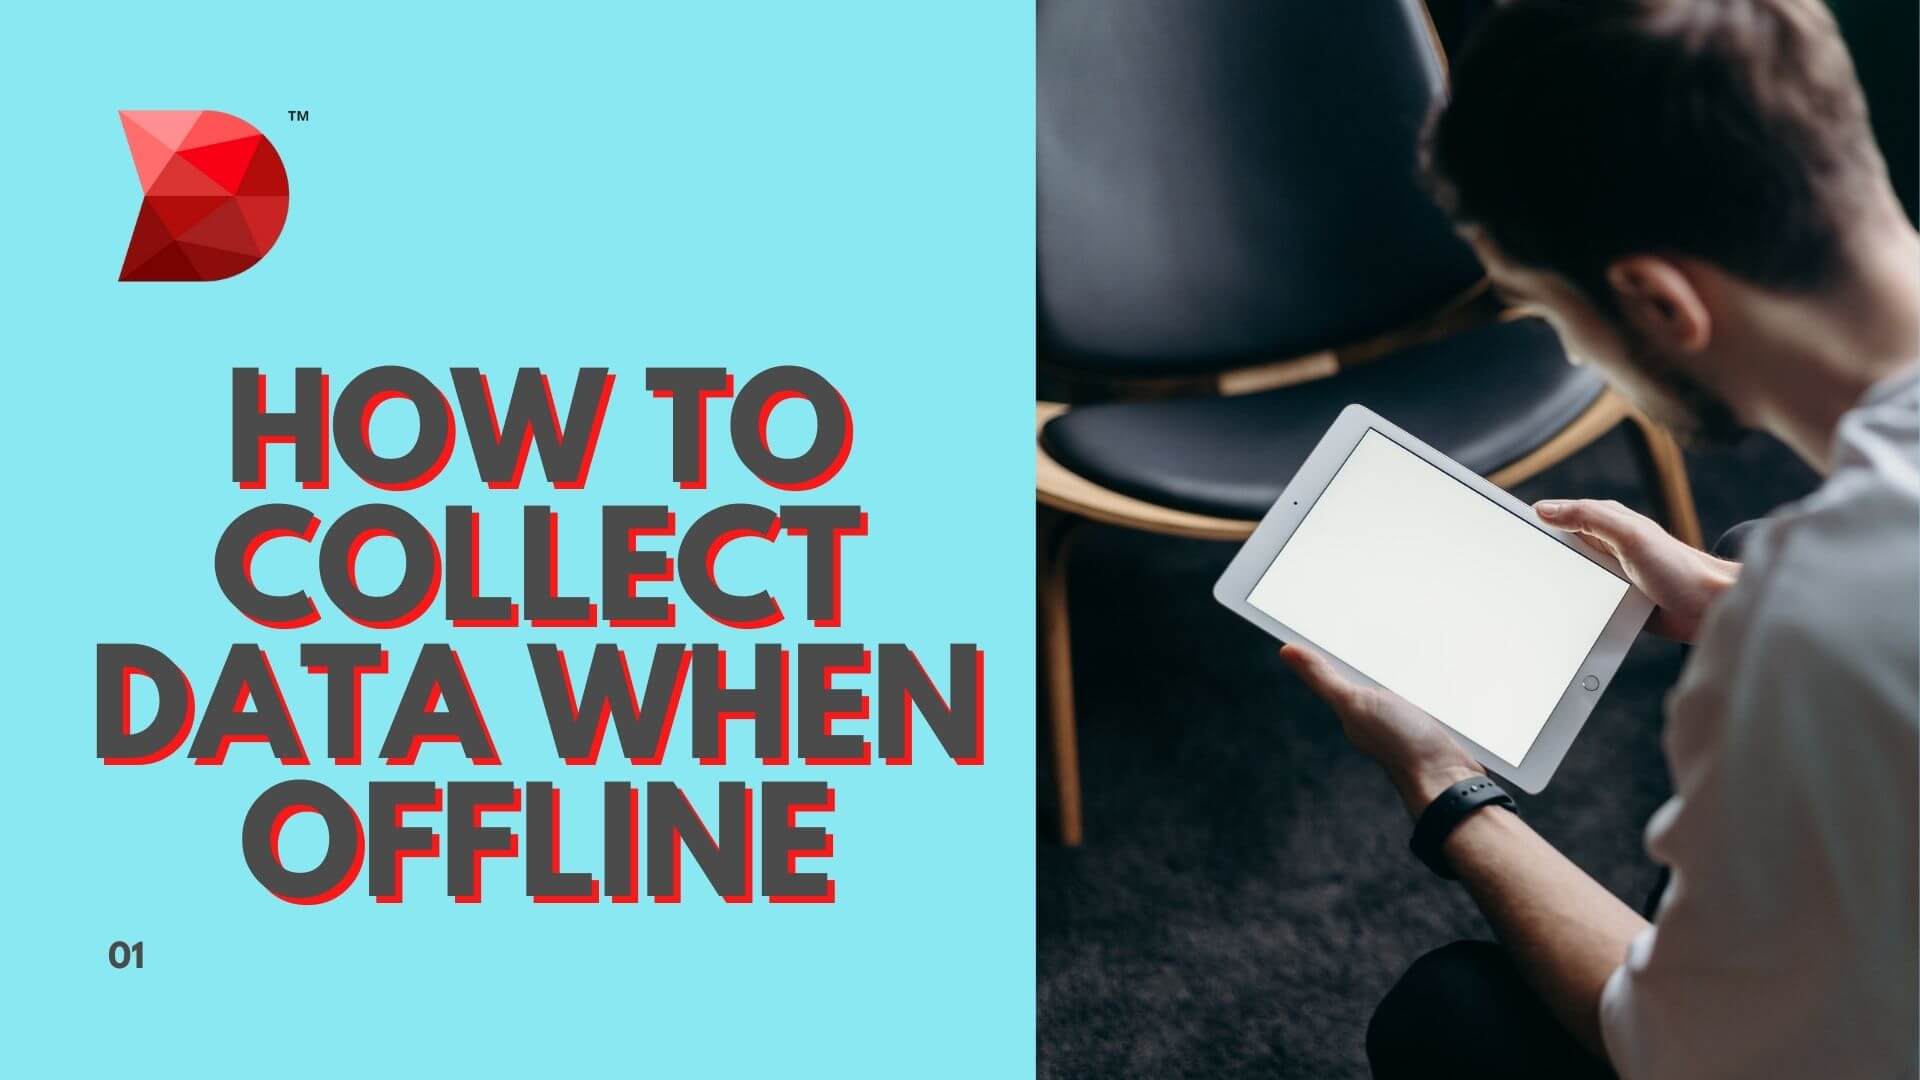 This article will share all the secrets you need to know about offline data collection. Read here to learn more!